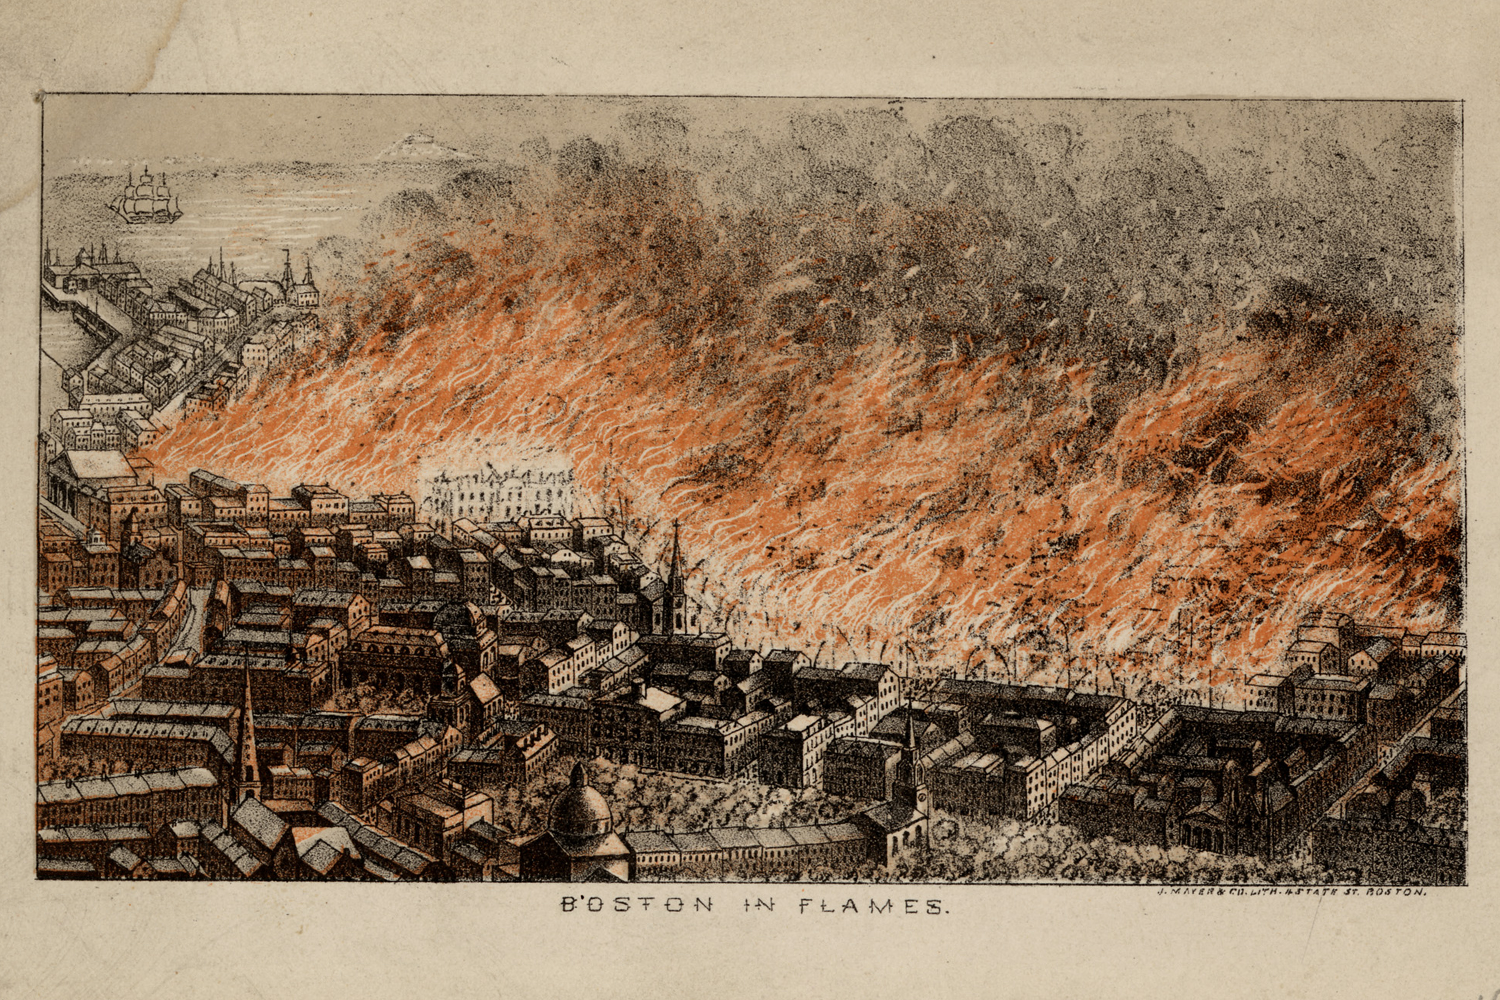 An etching of Boston in flames. The fire is rendered in bright orange while the rest of the line work is black and white.